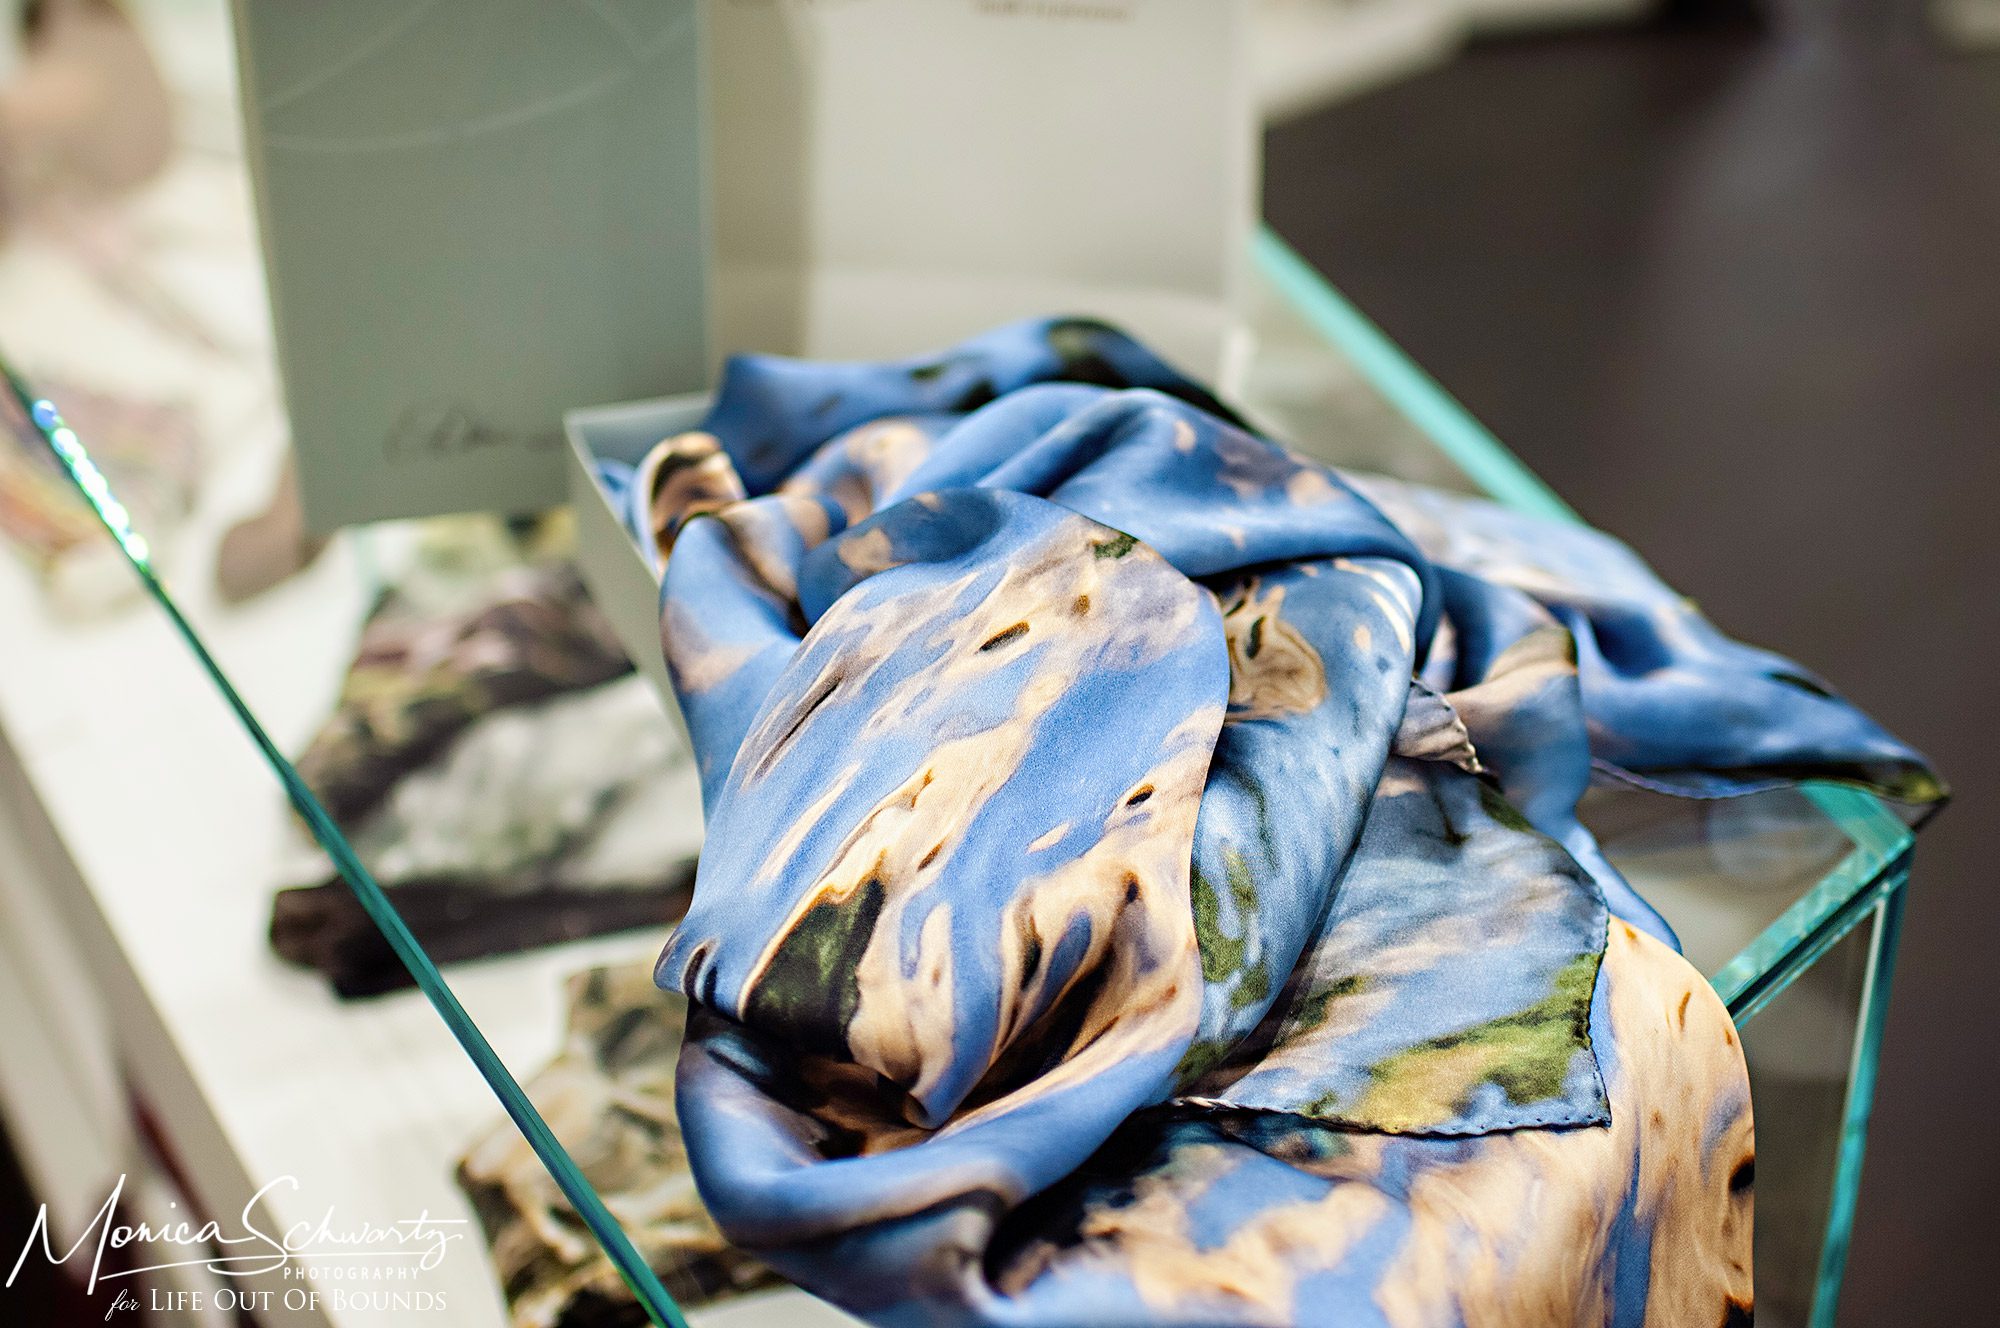 The-exquisite-silk-shawls-by-Adima-made-in-Presence-Milano-Italy